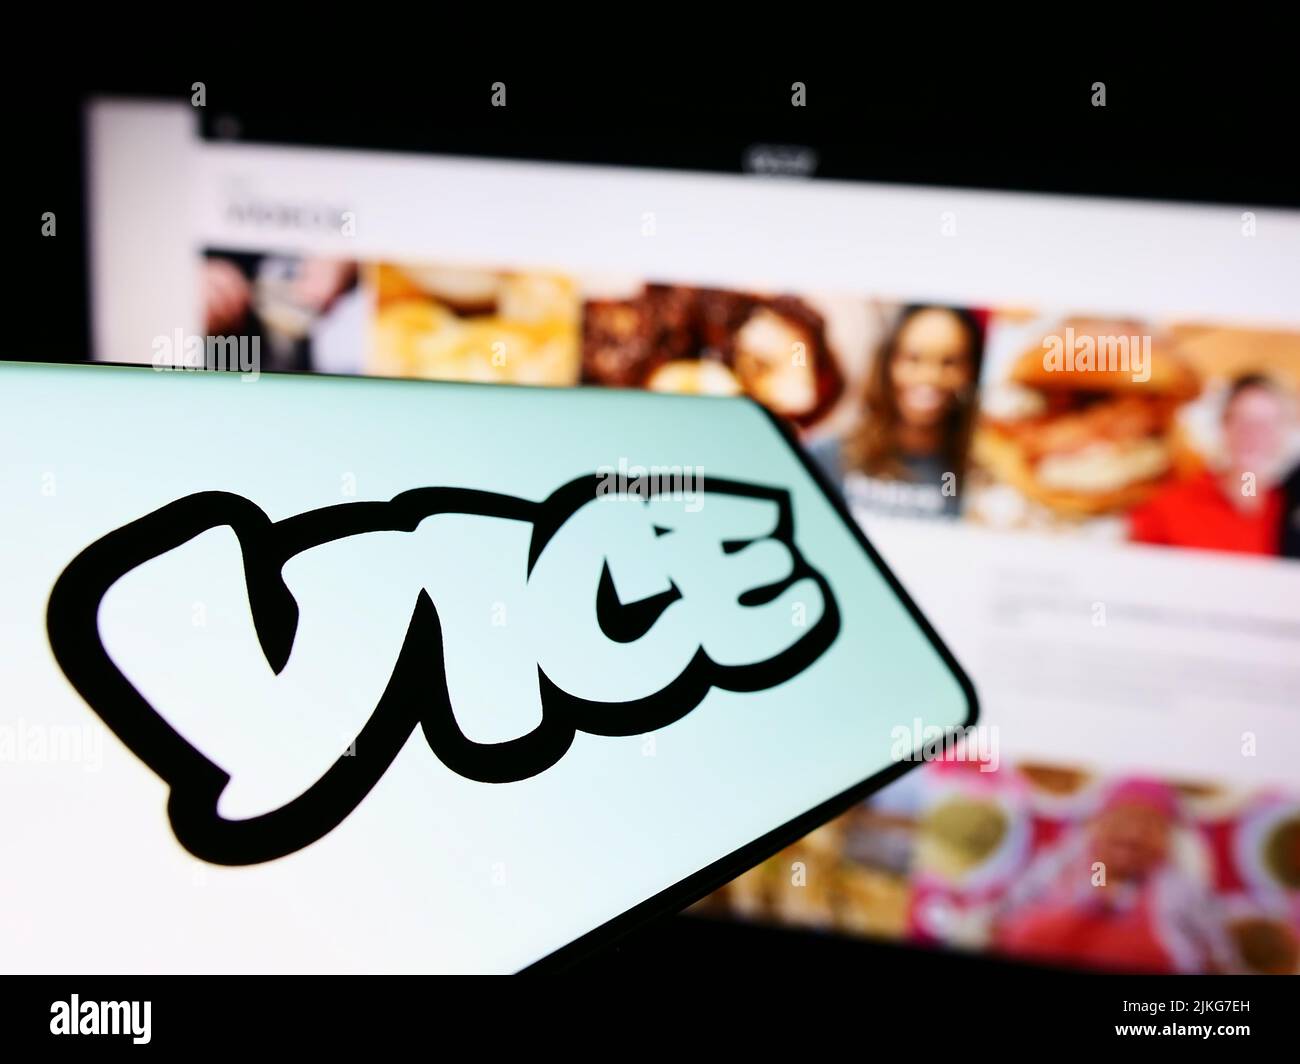 Smartphone with logo of broadcasting company Vice Media LLC on screen in front of business website. Focus on center-left of phone display. Stock Photo